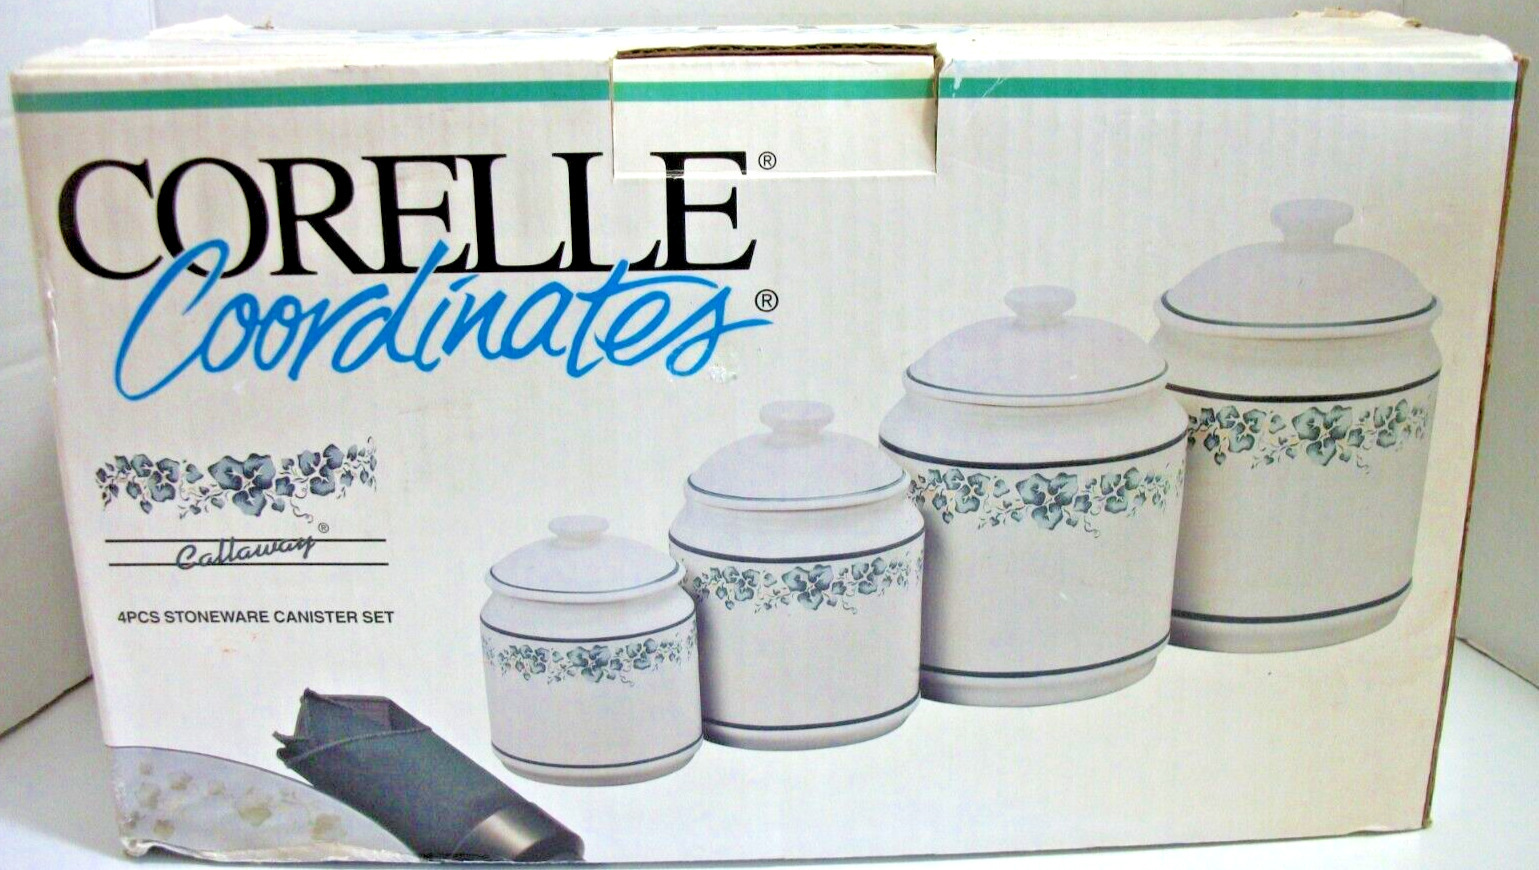 Vintage CORELLE COORDINATES CALLAWAY CANISTERS Set of 4 w/Lids NEW OLD STOCK